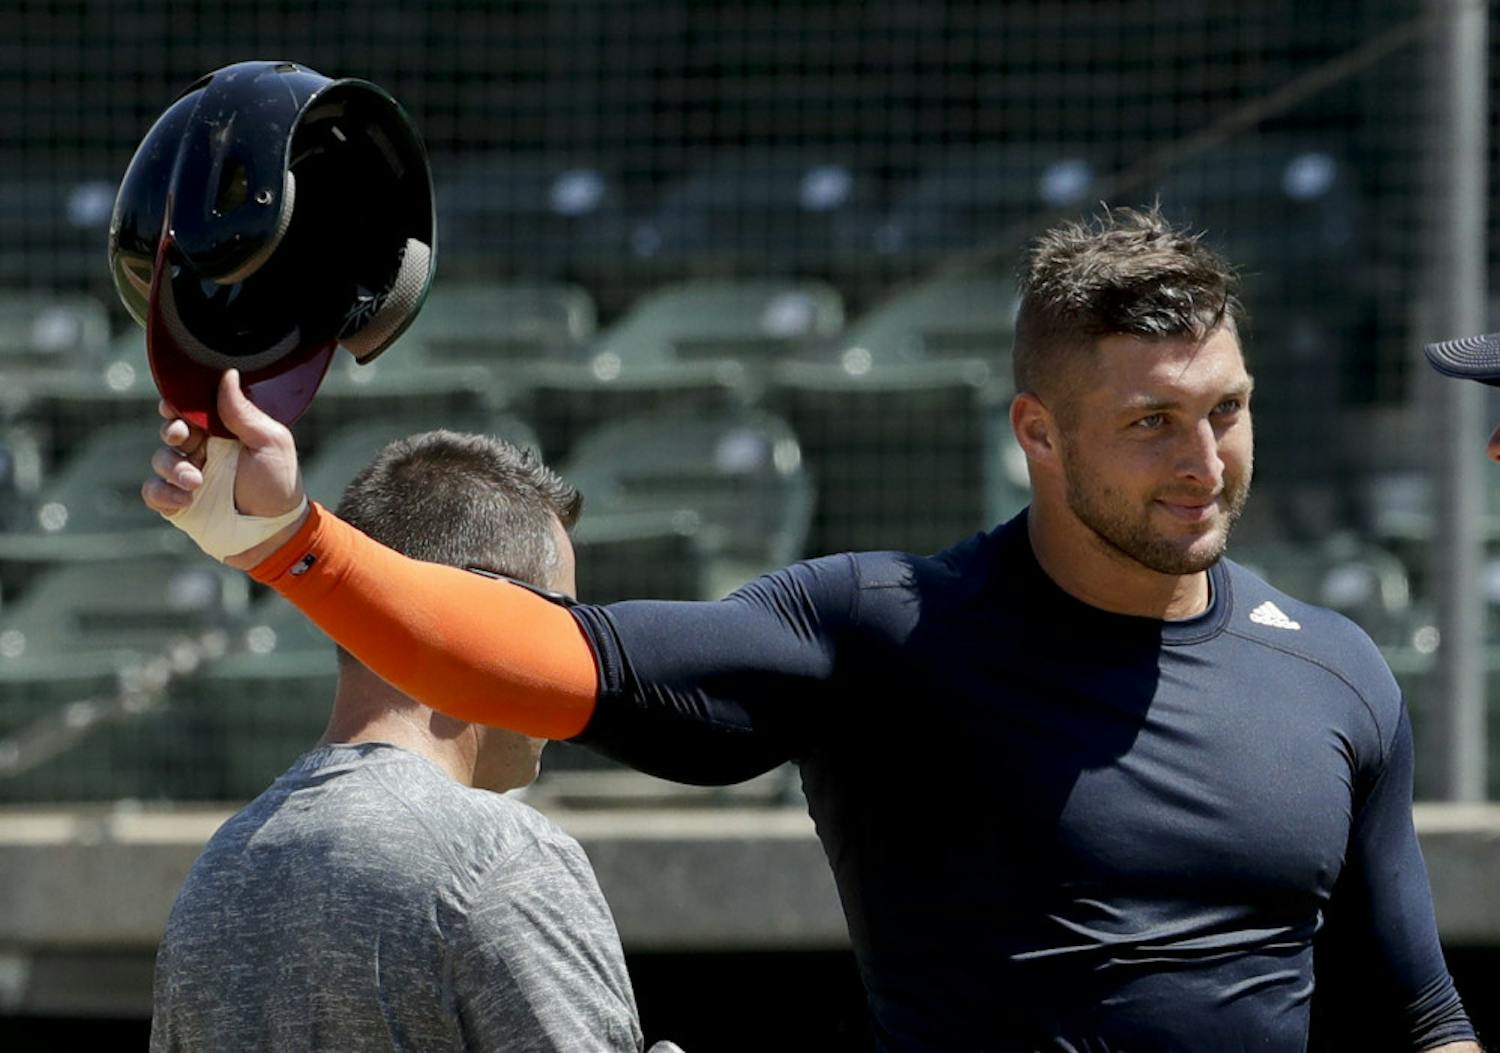 Former NFL quarterback, Tim Tebow finishes his work out for baseball scouts and the media during a showcase on the campus of the University of Southern California, Tuesday, Aug. 30, 2016 in Los Angeles. The Heisman Trophy winner works out for a big gathering of scouts on USC's campus in an attempt to start a career in a sport he hasn't played regularly since high school. (AP Photo/Chris Carlson)